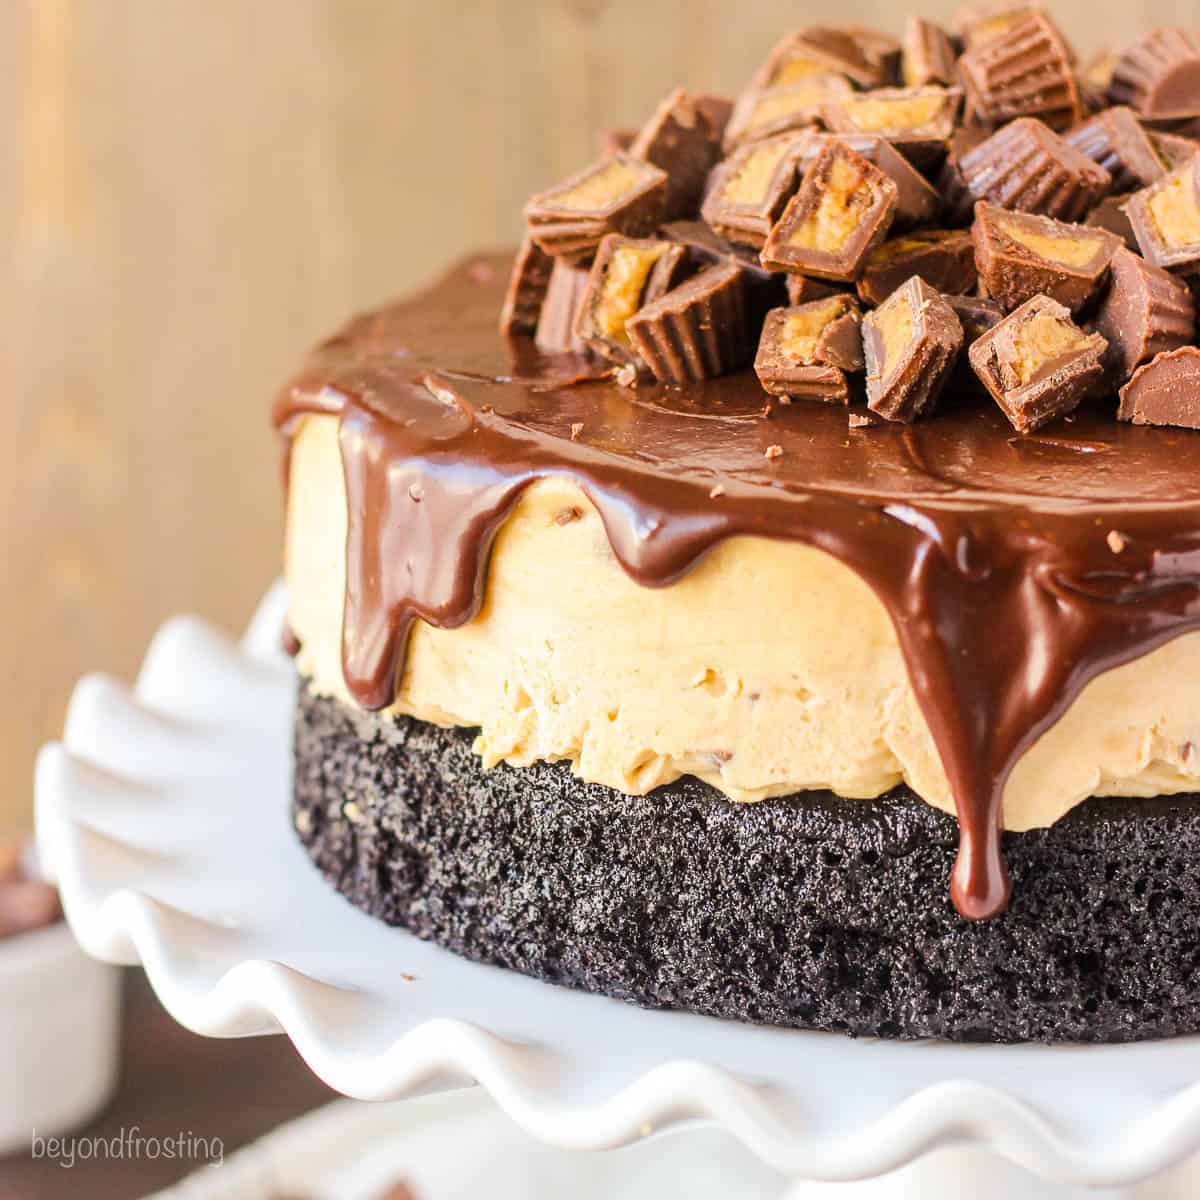 Best Reese's Explosion Cake Recipe - How to Make Make Reese's Explosion Cake